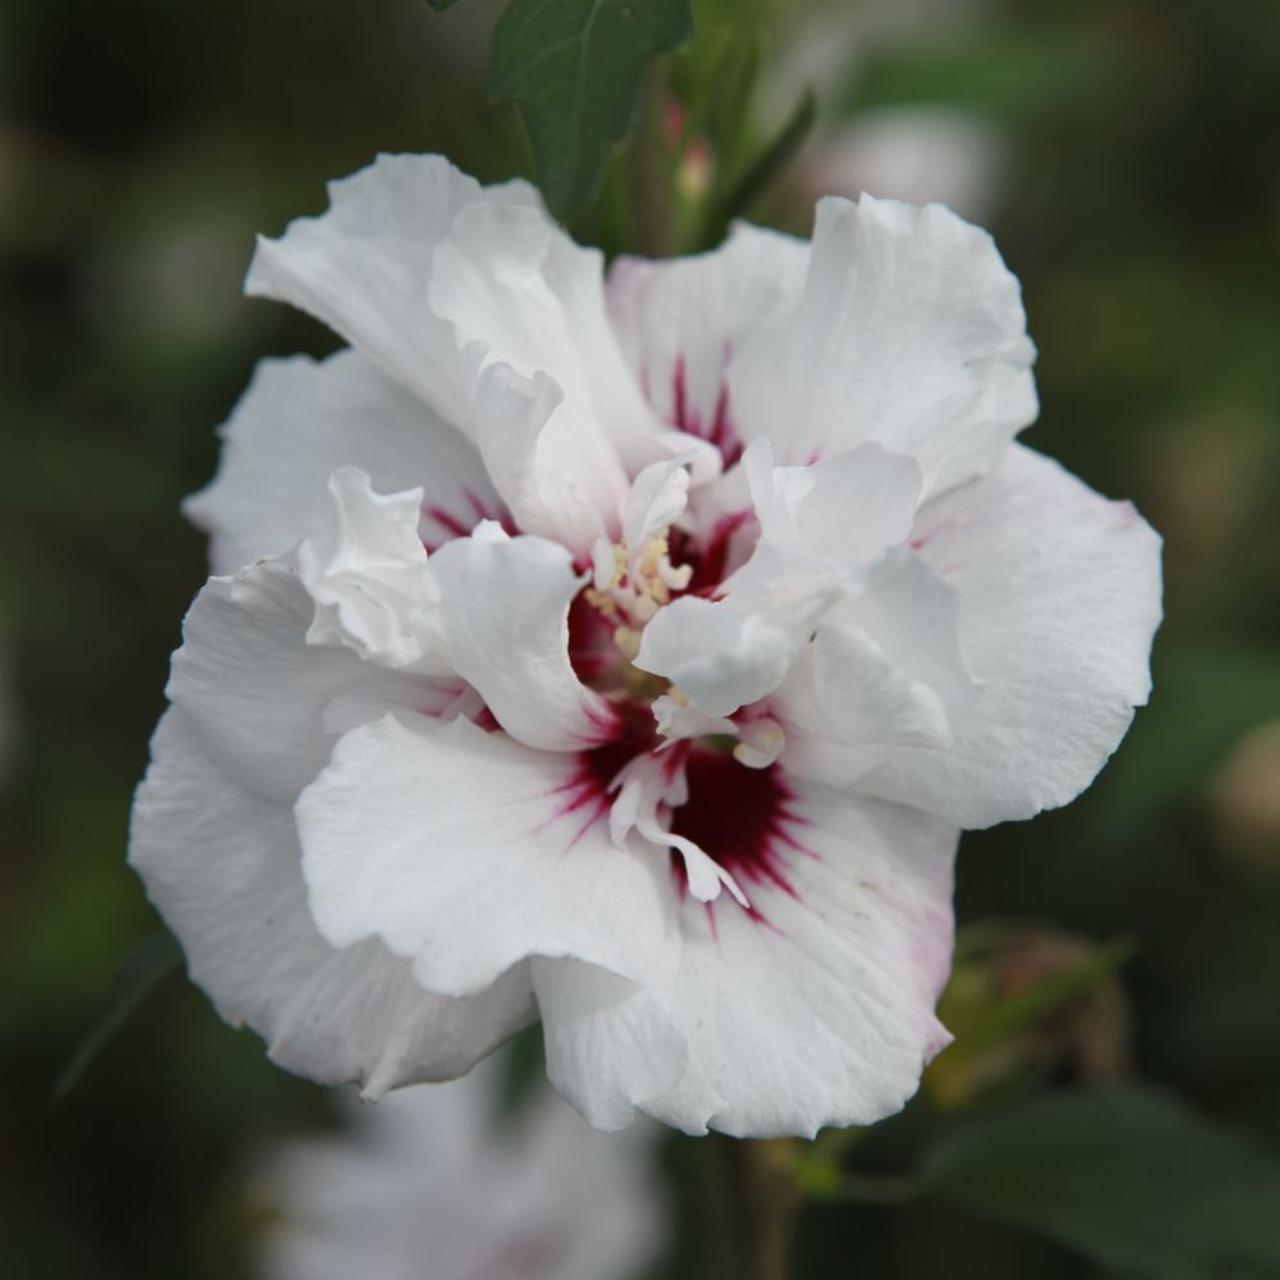 Hibiscus syr. 'Lady Stanley' plant